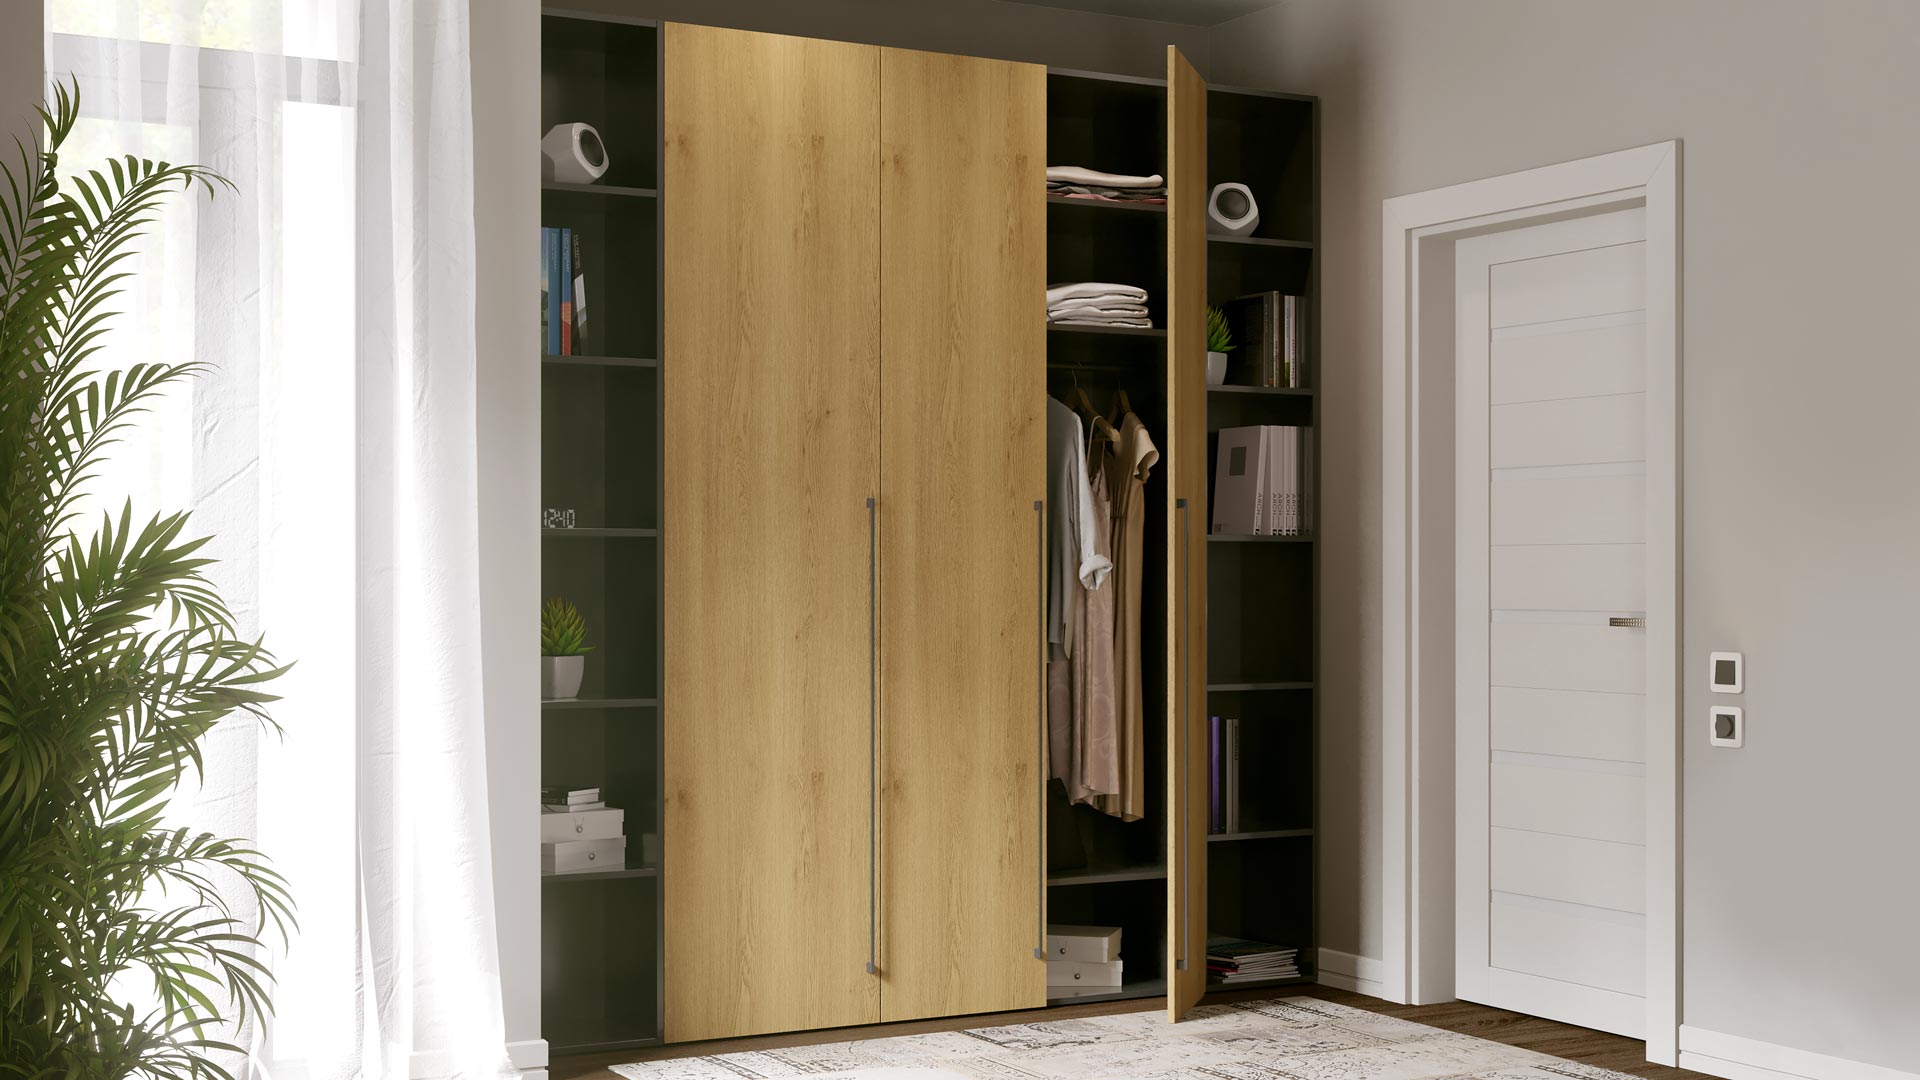 Modern Verno Lite wardrobes - premium quality at an affordable price